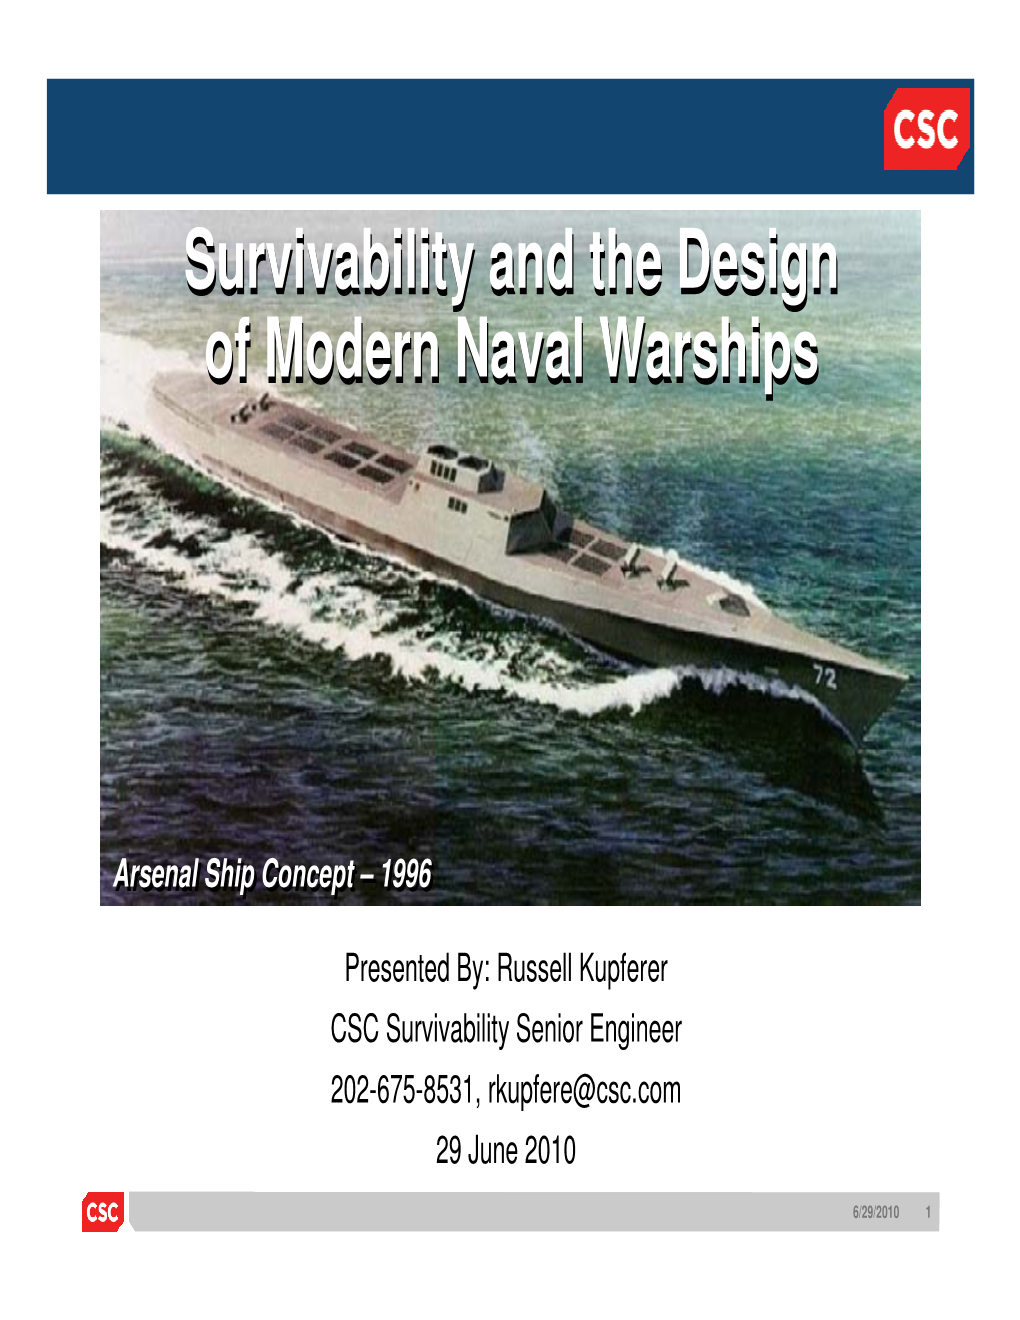 Survivability and the Design of Modern Naval Warships